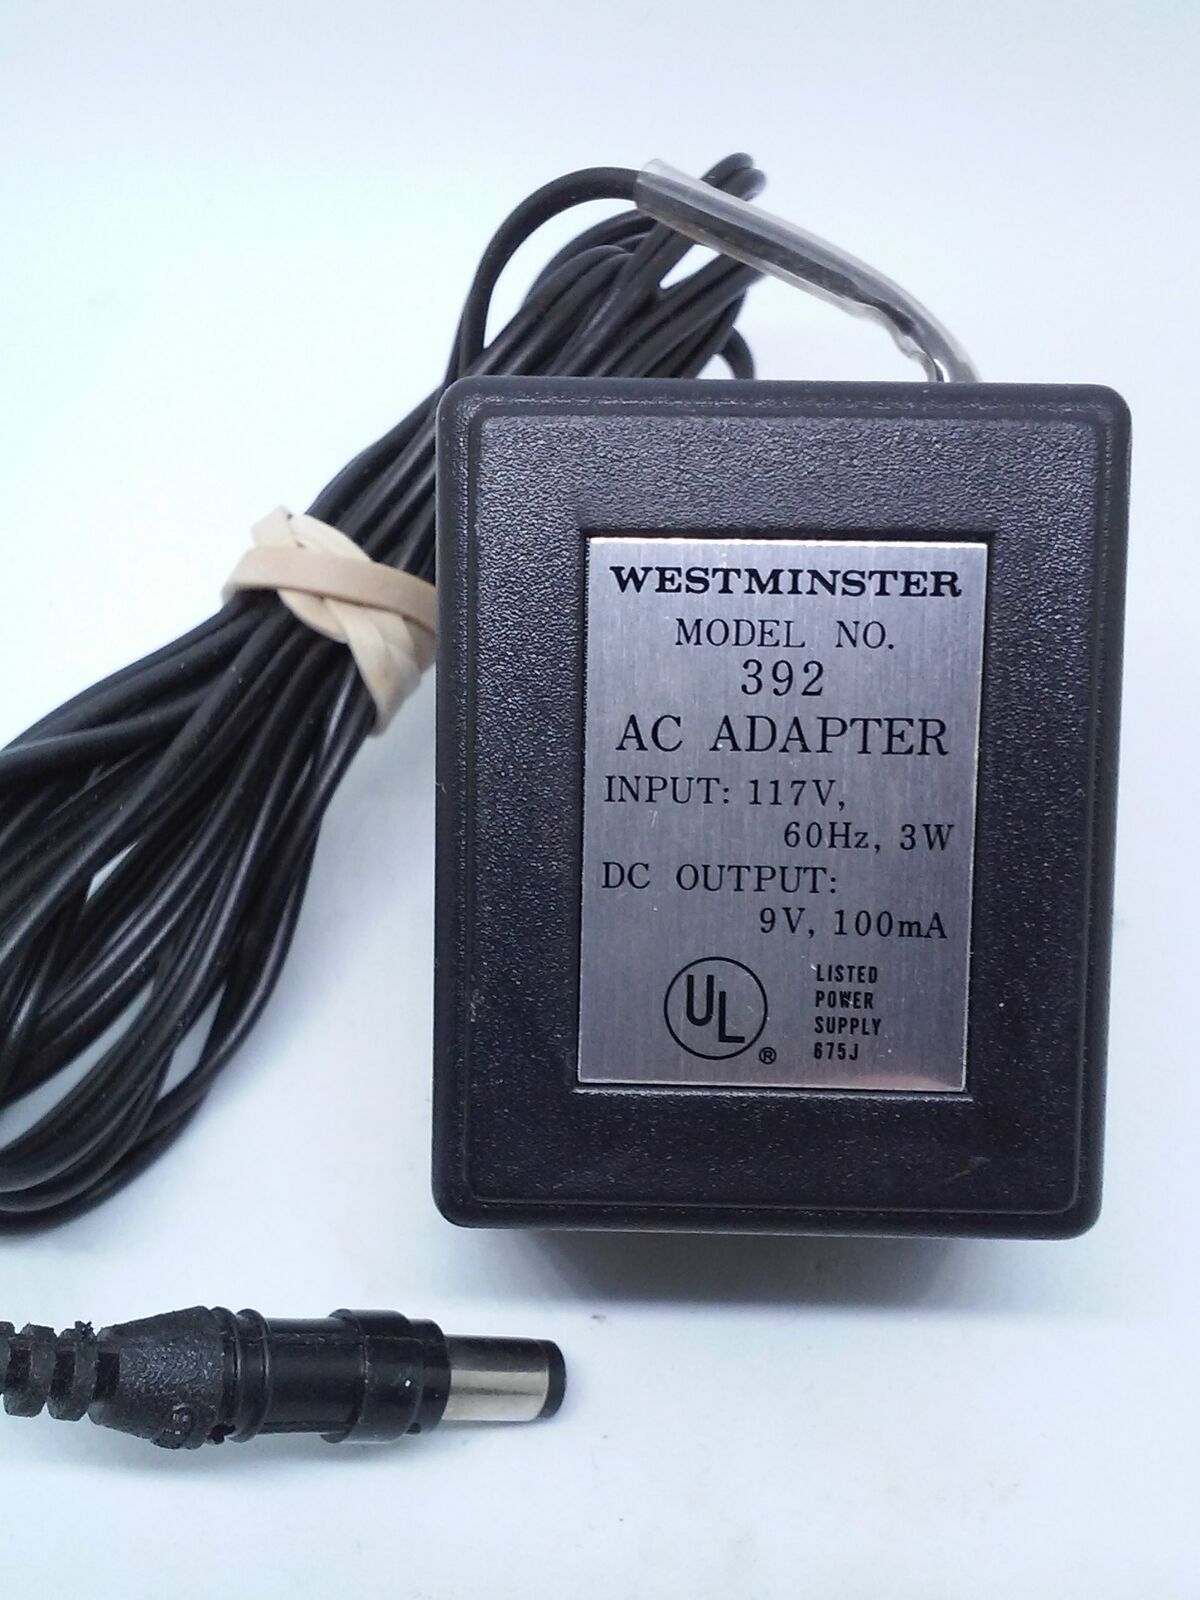 Westminster Model No. 392 AC Adapter 9V 100mA POWER CHARGER